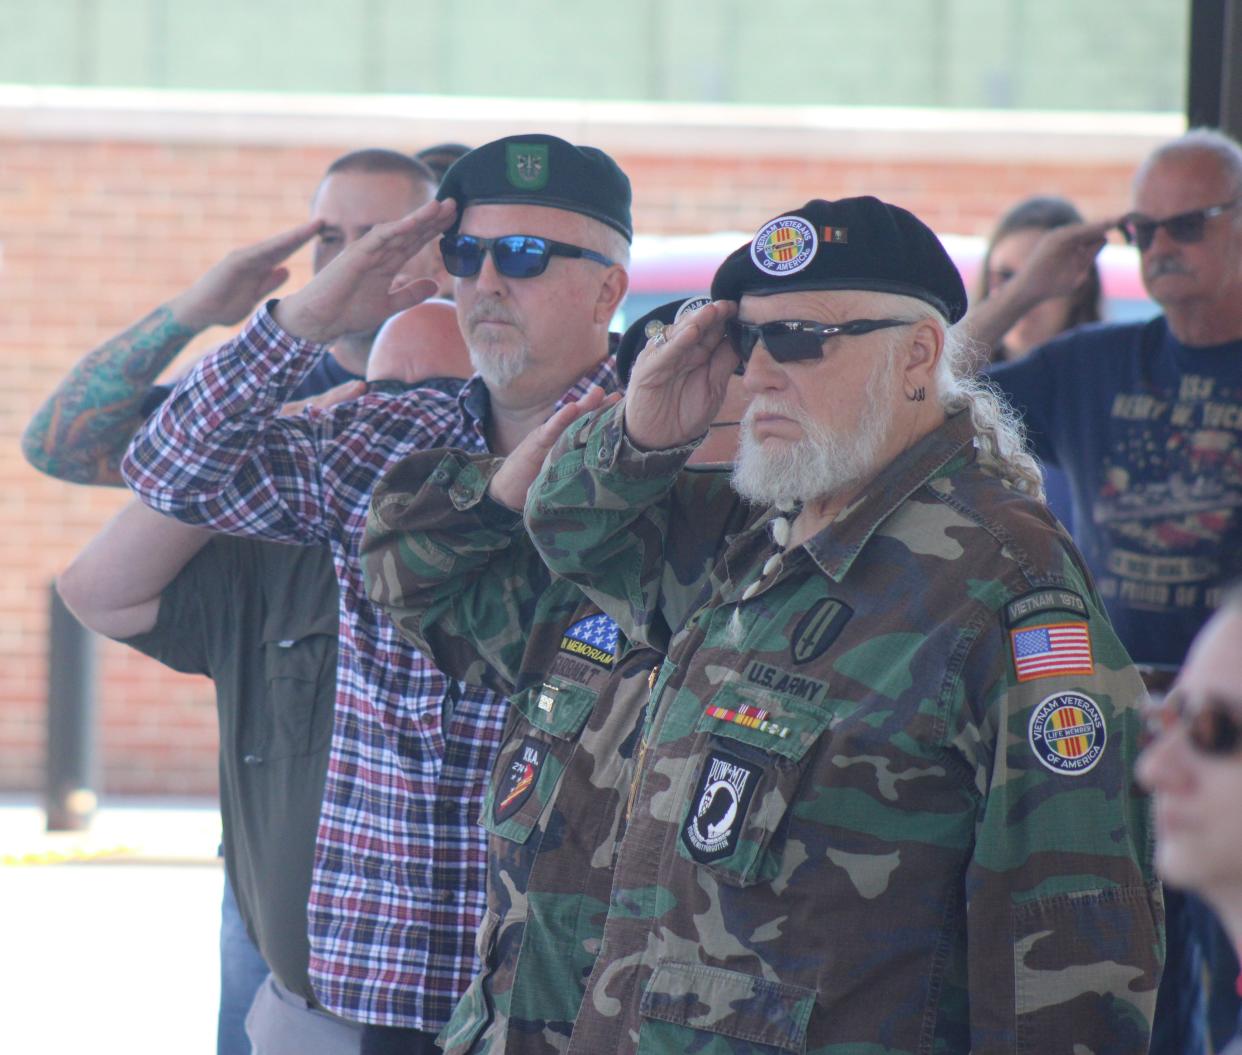 Cheboygan County veterans give a salute during a Memorial Day ceremony held at Festival Square in Cheboygan on Monday.